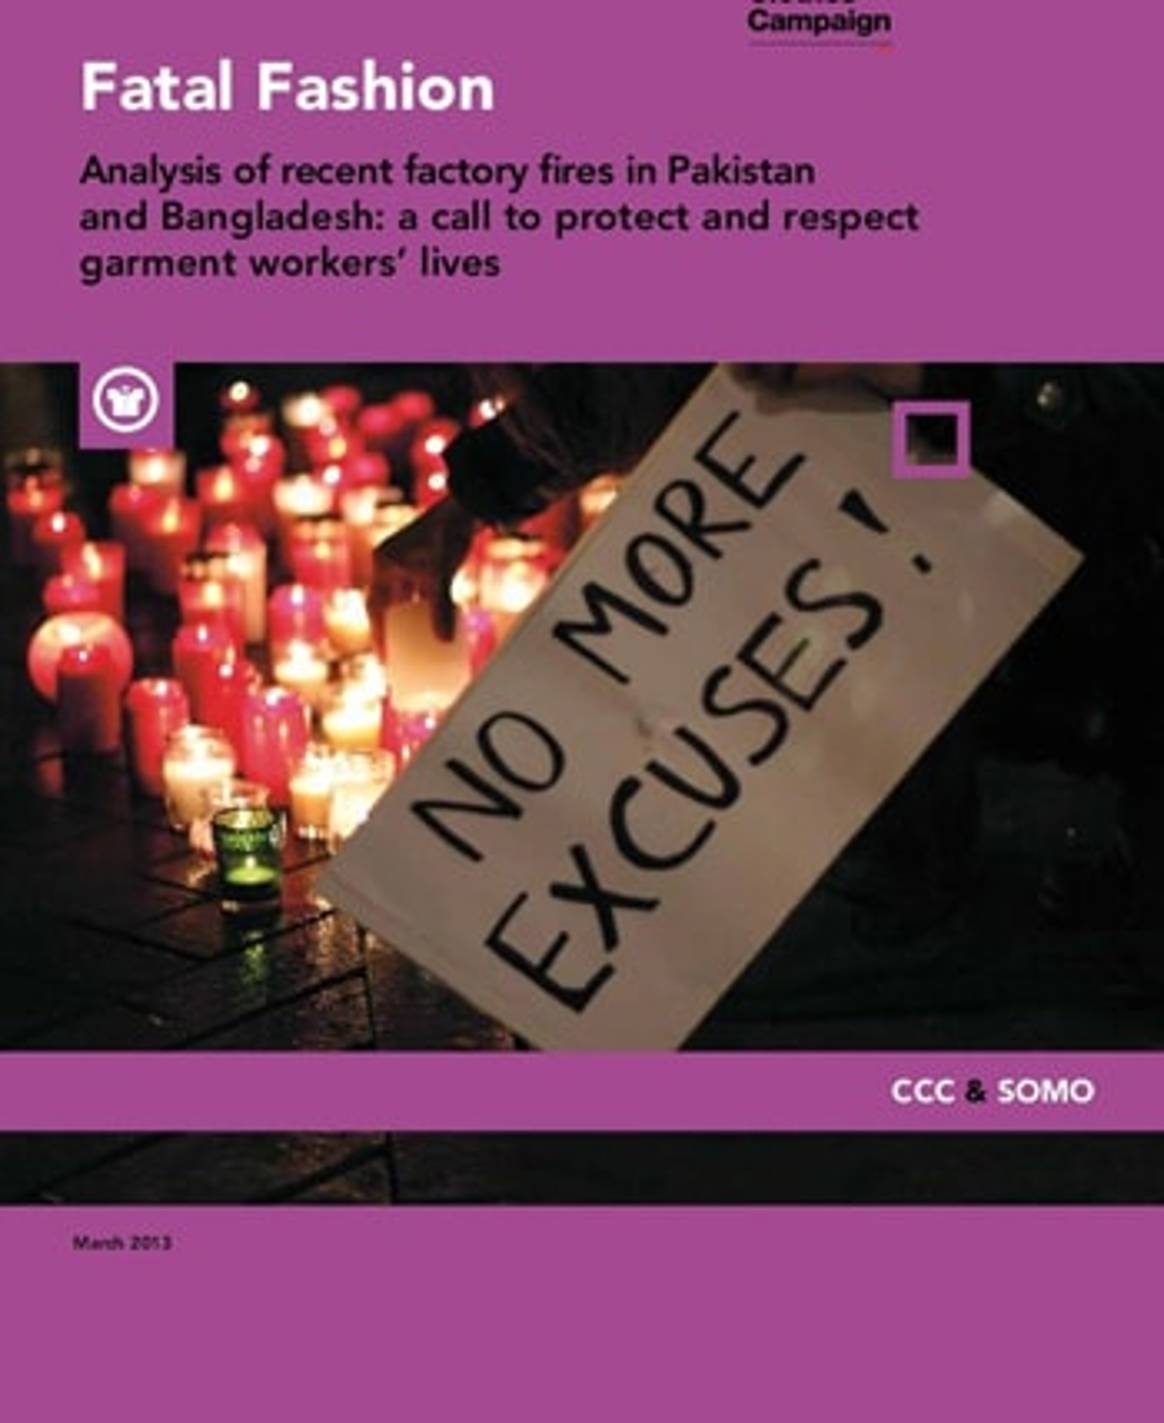 “Fatal Fashion” analyses fires in garment factories